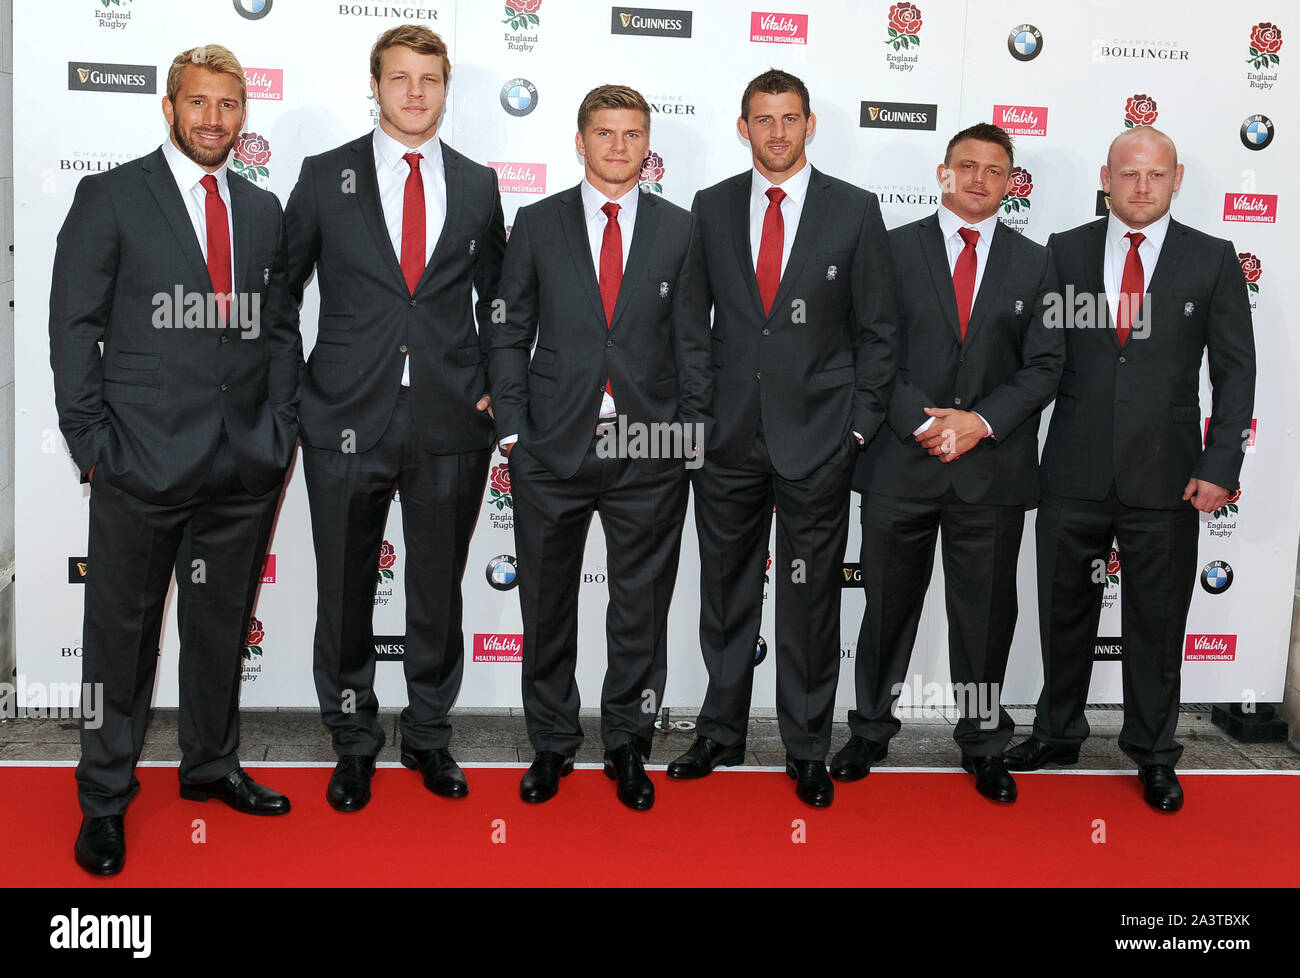 Photo Must Be Credited ©Jeff Spicer/Alpha Press 079852 05/08/2015 England Rugby Team, Chris Robshaw, Joe Launchbury, Owen Farrell, Tom Wood, David Wilson and Dan Cole at the Carry Them Home Rugby Dinner held at Grosvenor House London Stock Photo